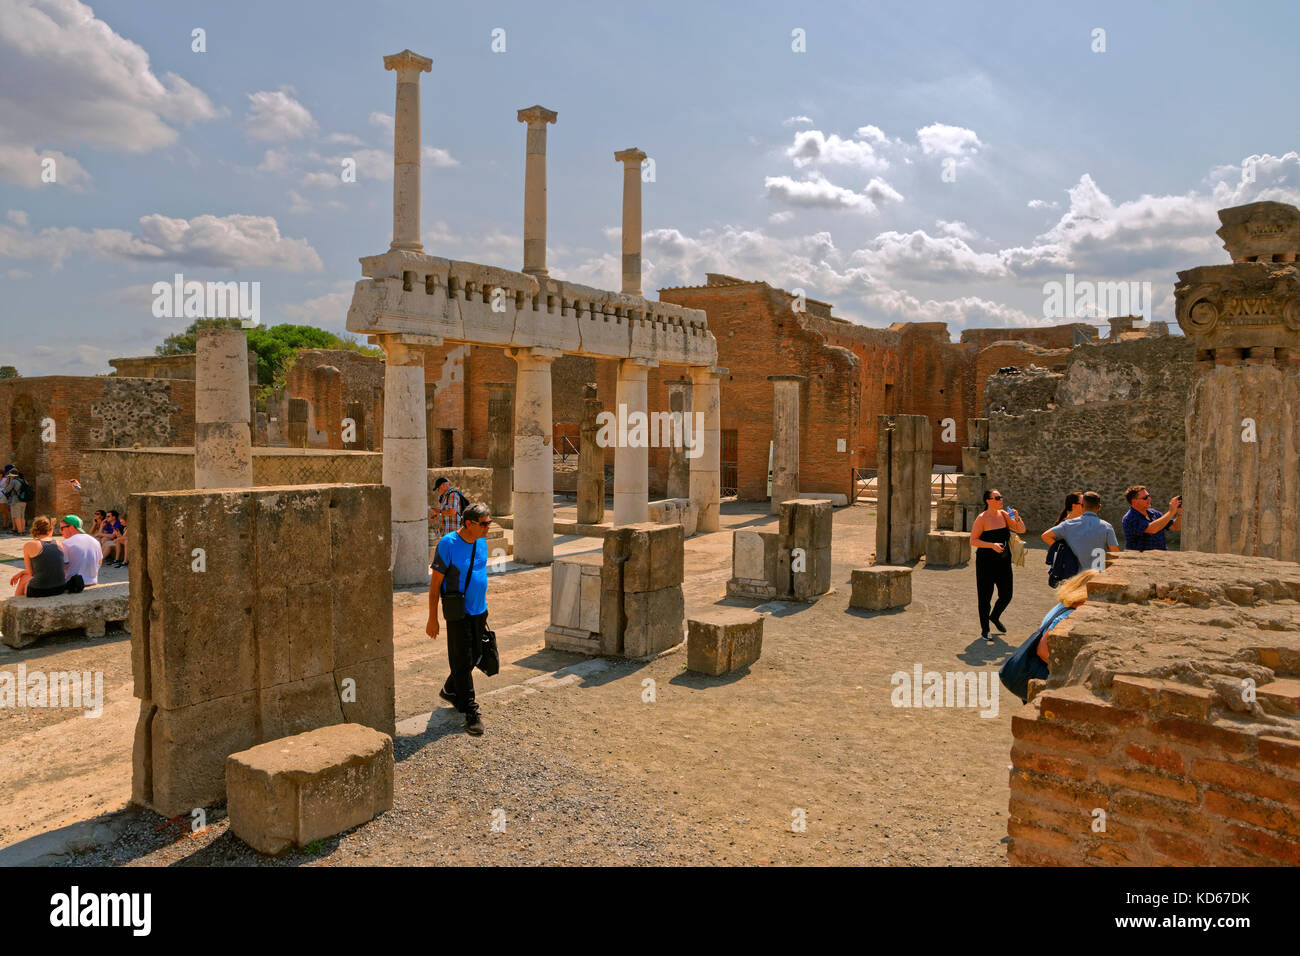 Arcadian way with doric columns at the Forum in the ruined Roman city of Pompeii at Pompei Scavi near Naples, Italy. Stock Photo